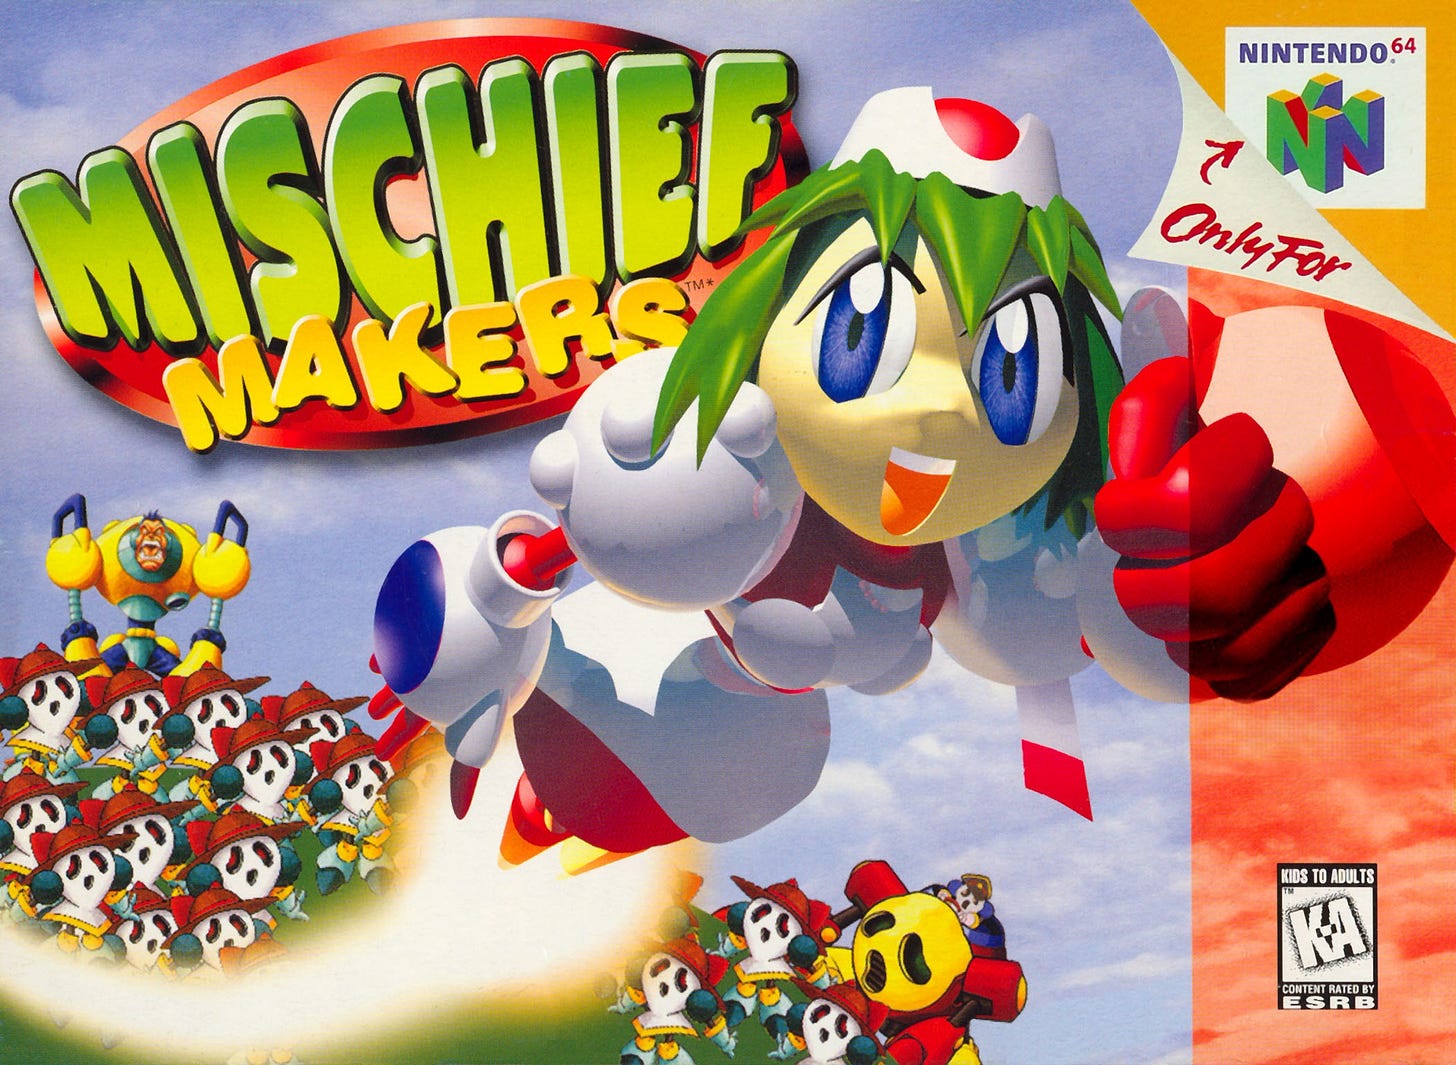 The box art for Mischief Makers, featuring the robotic maid, Marina flying through the air and into the foreground.